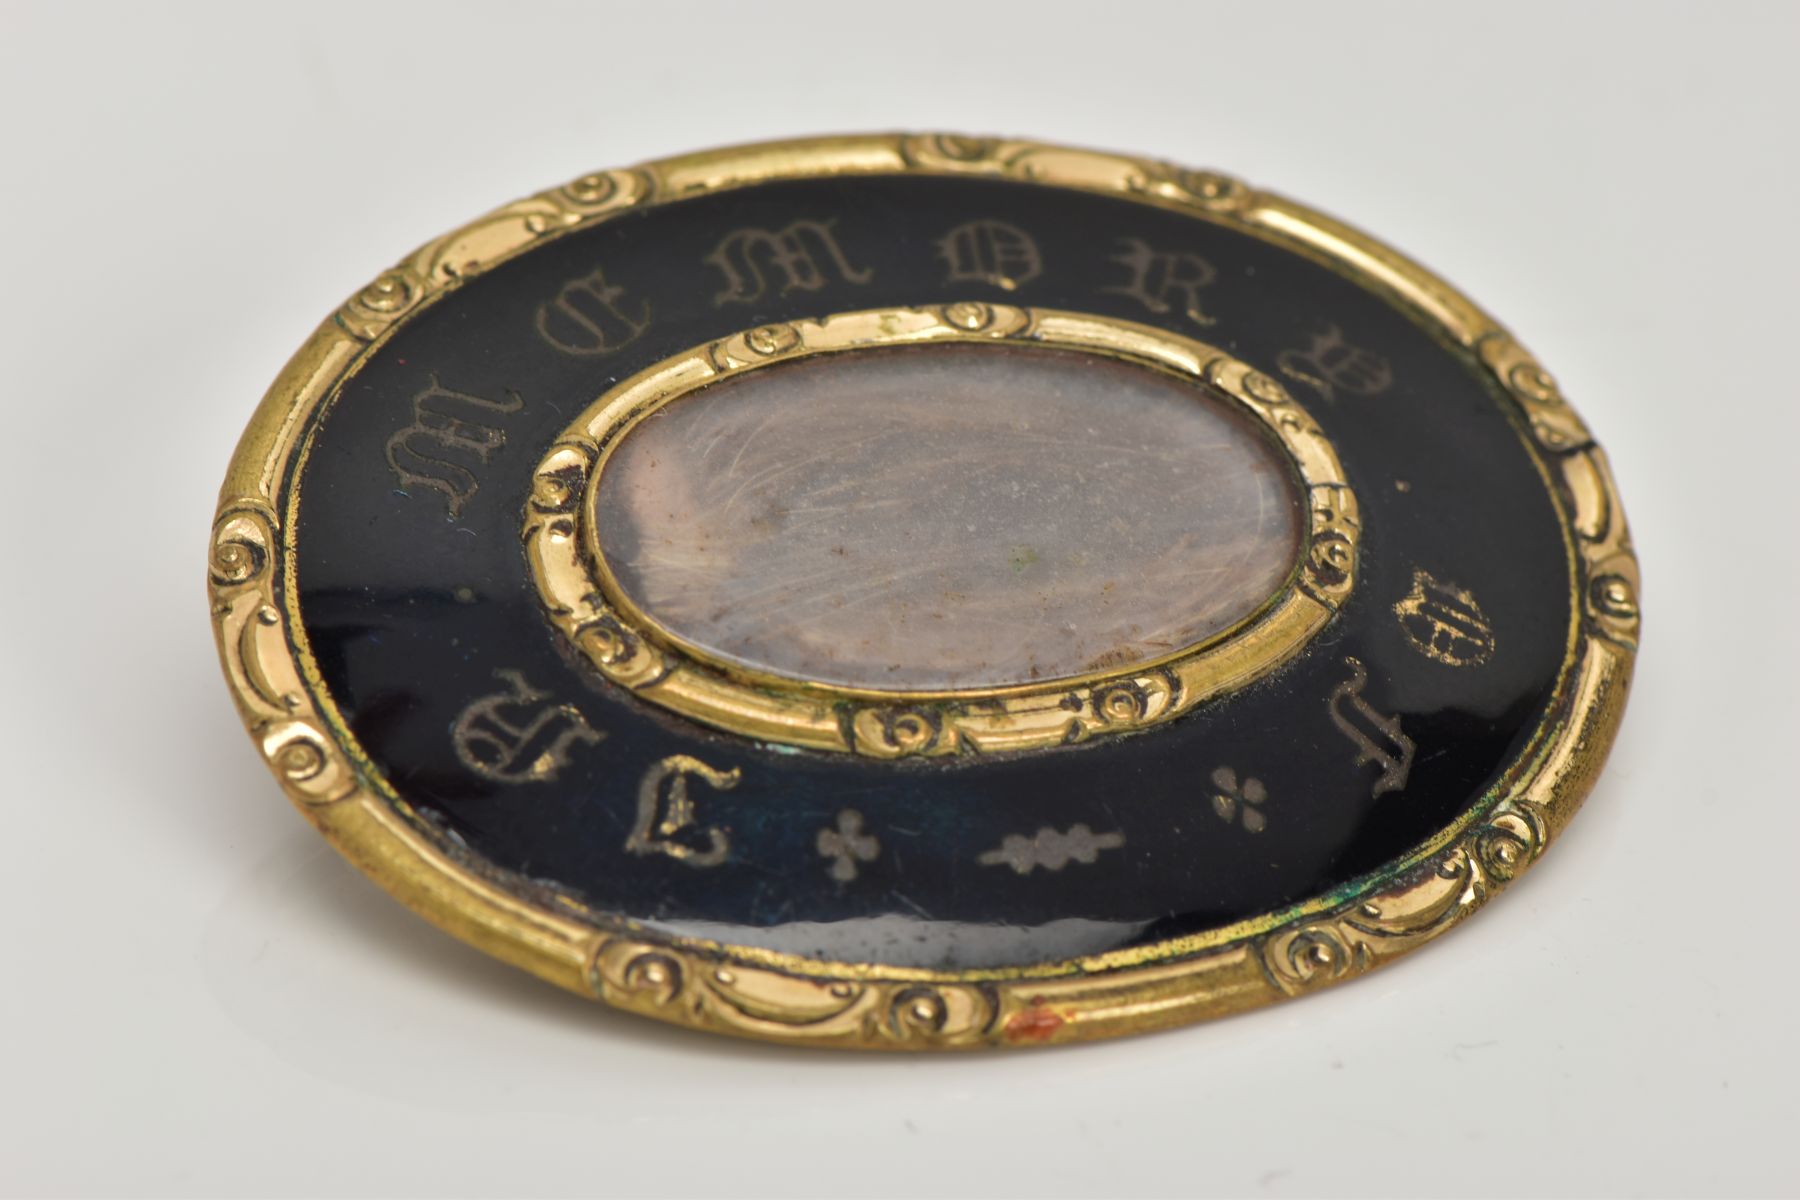 A VICTORIAN MOURNING BROOCH, an oval yellow metal brooch, black enamel with gold writing 'IN - Image 3 of 3